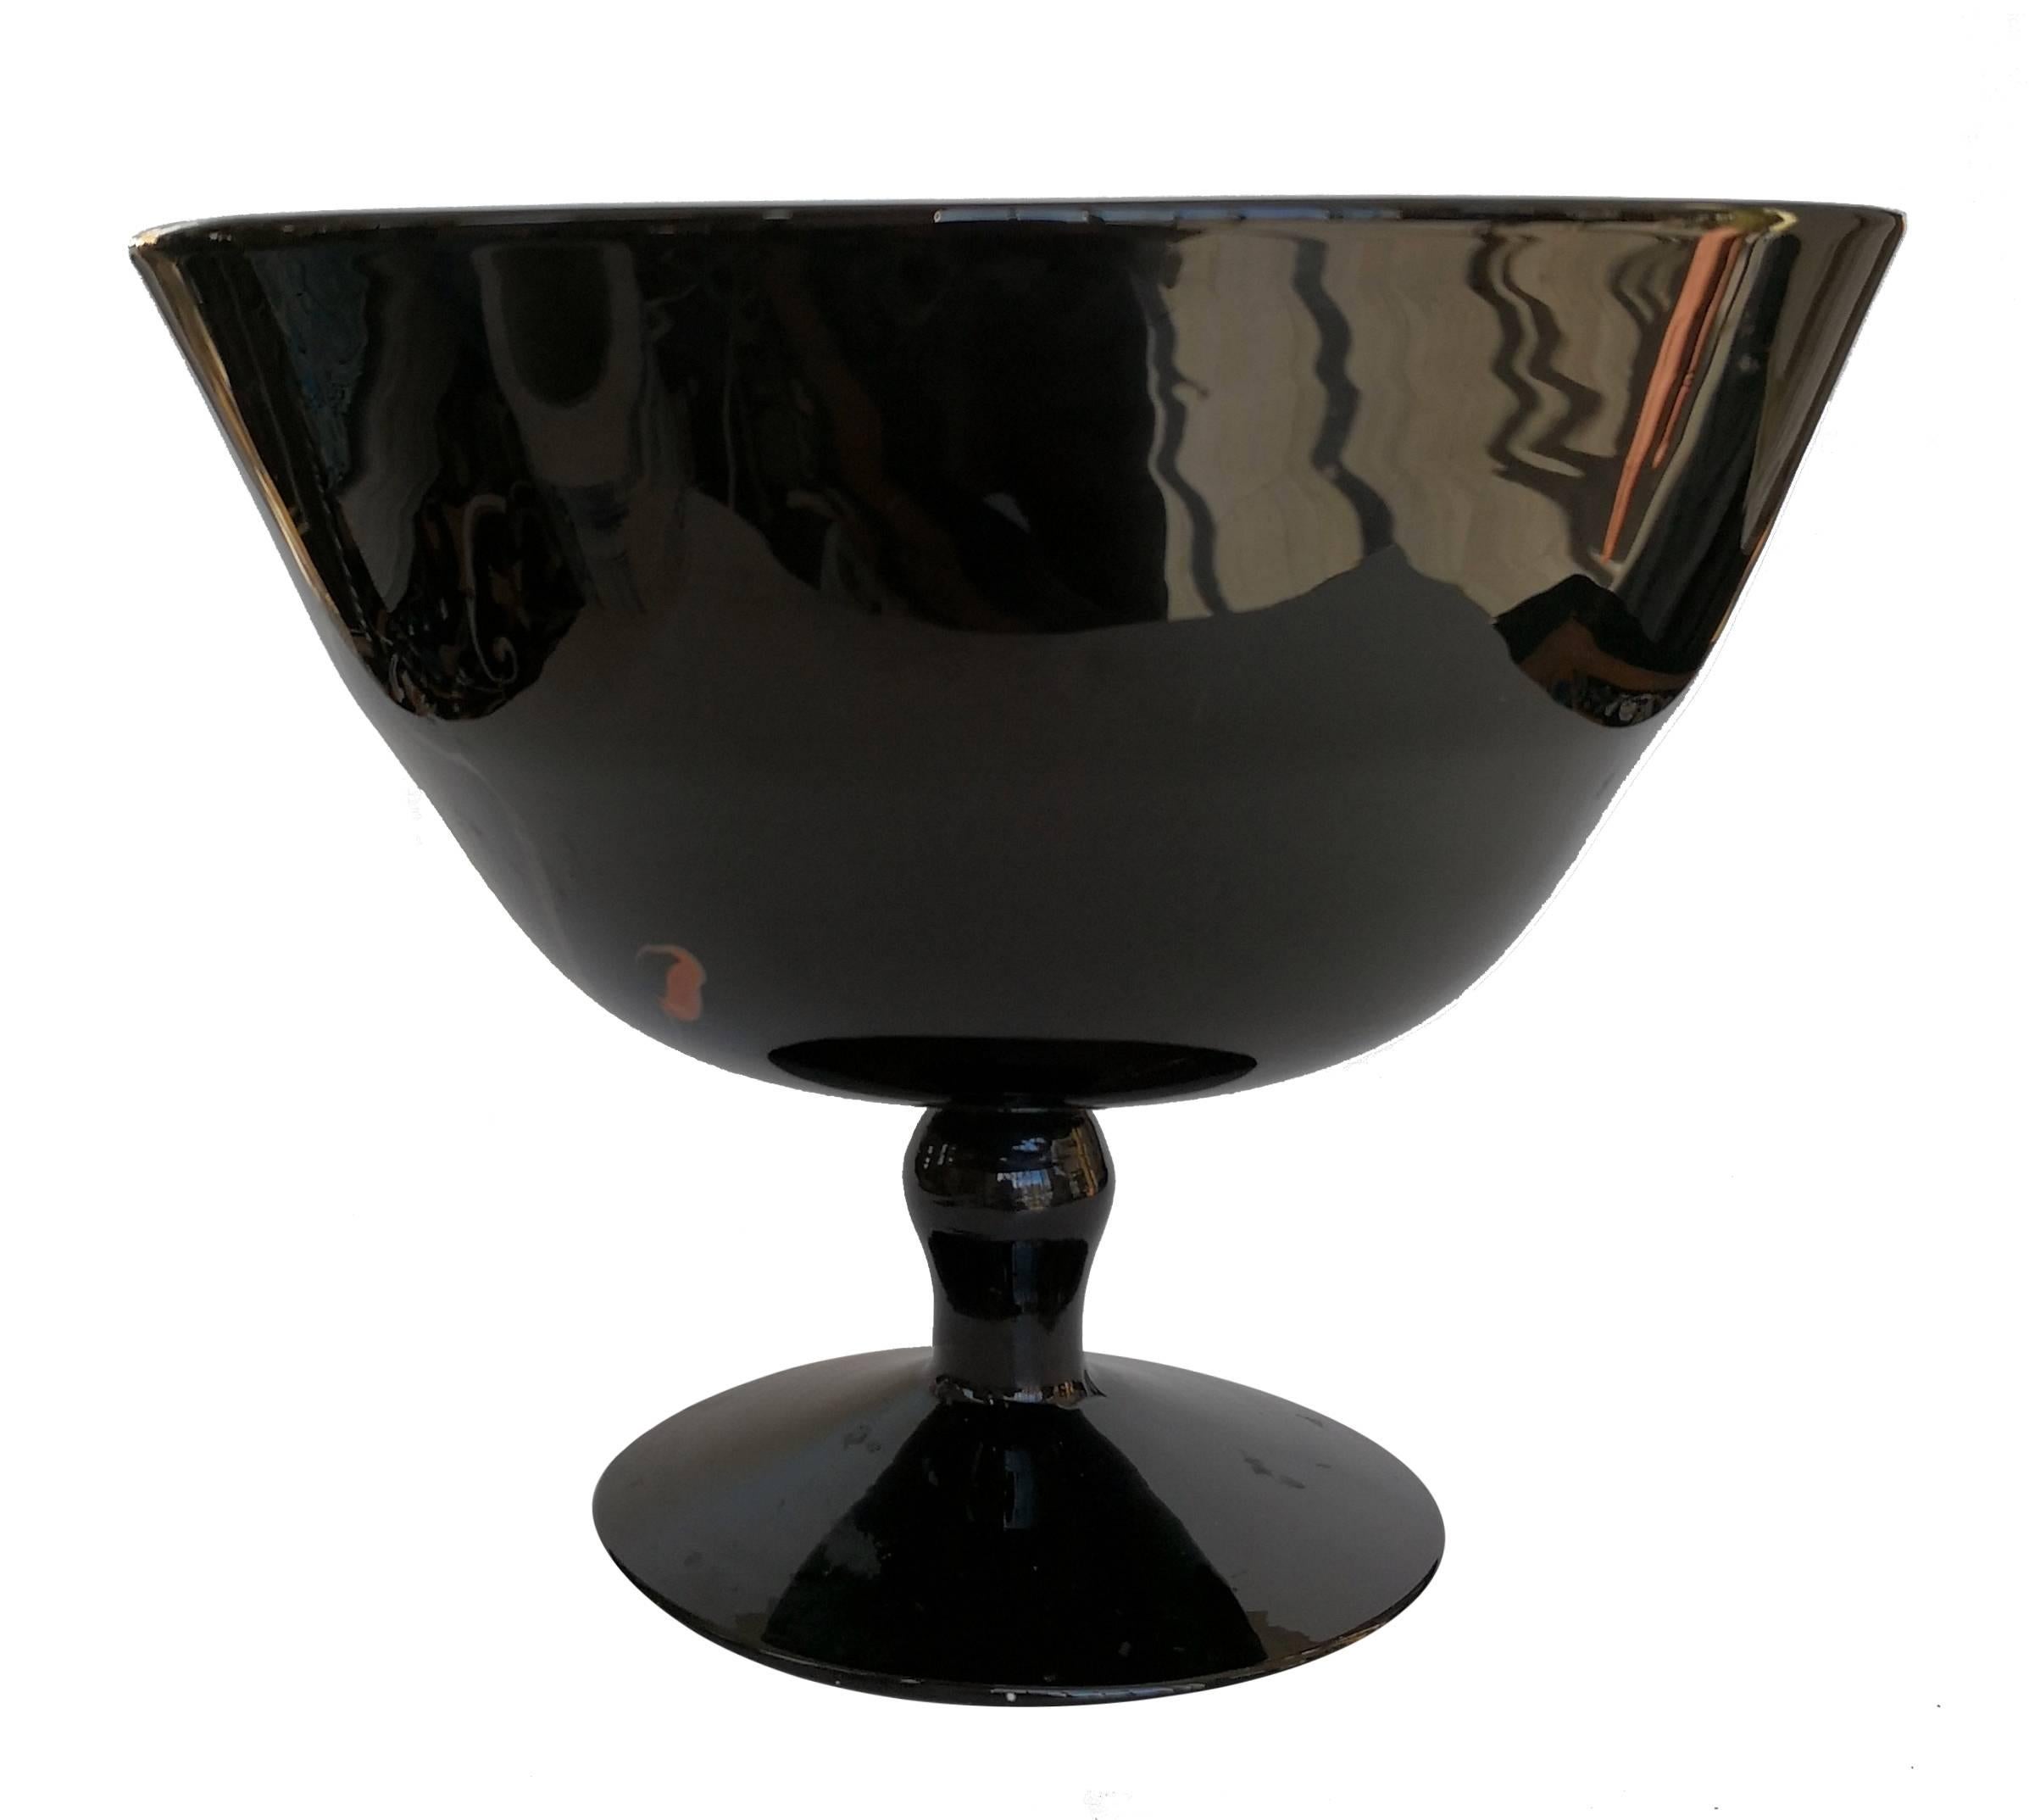 Opaque black glass with irregular brown veins making it unique. The base has a mark with the initials M and V overlapping. 
